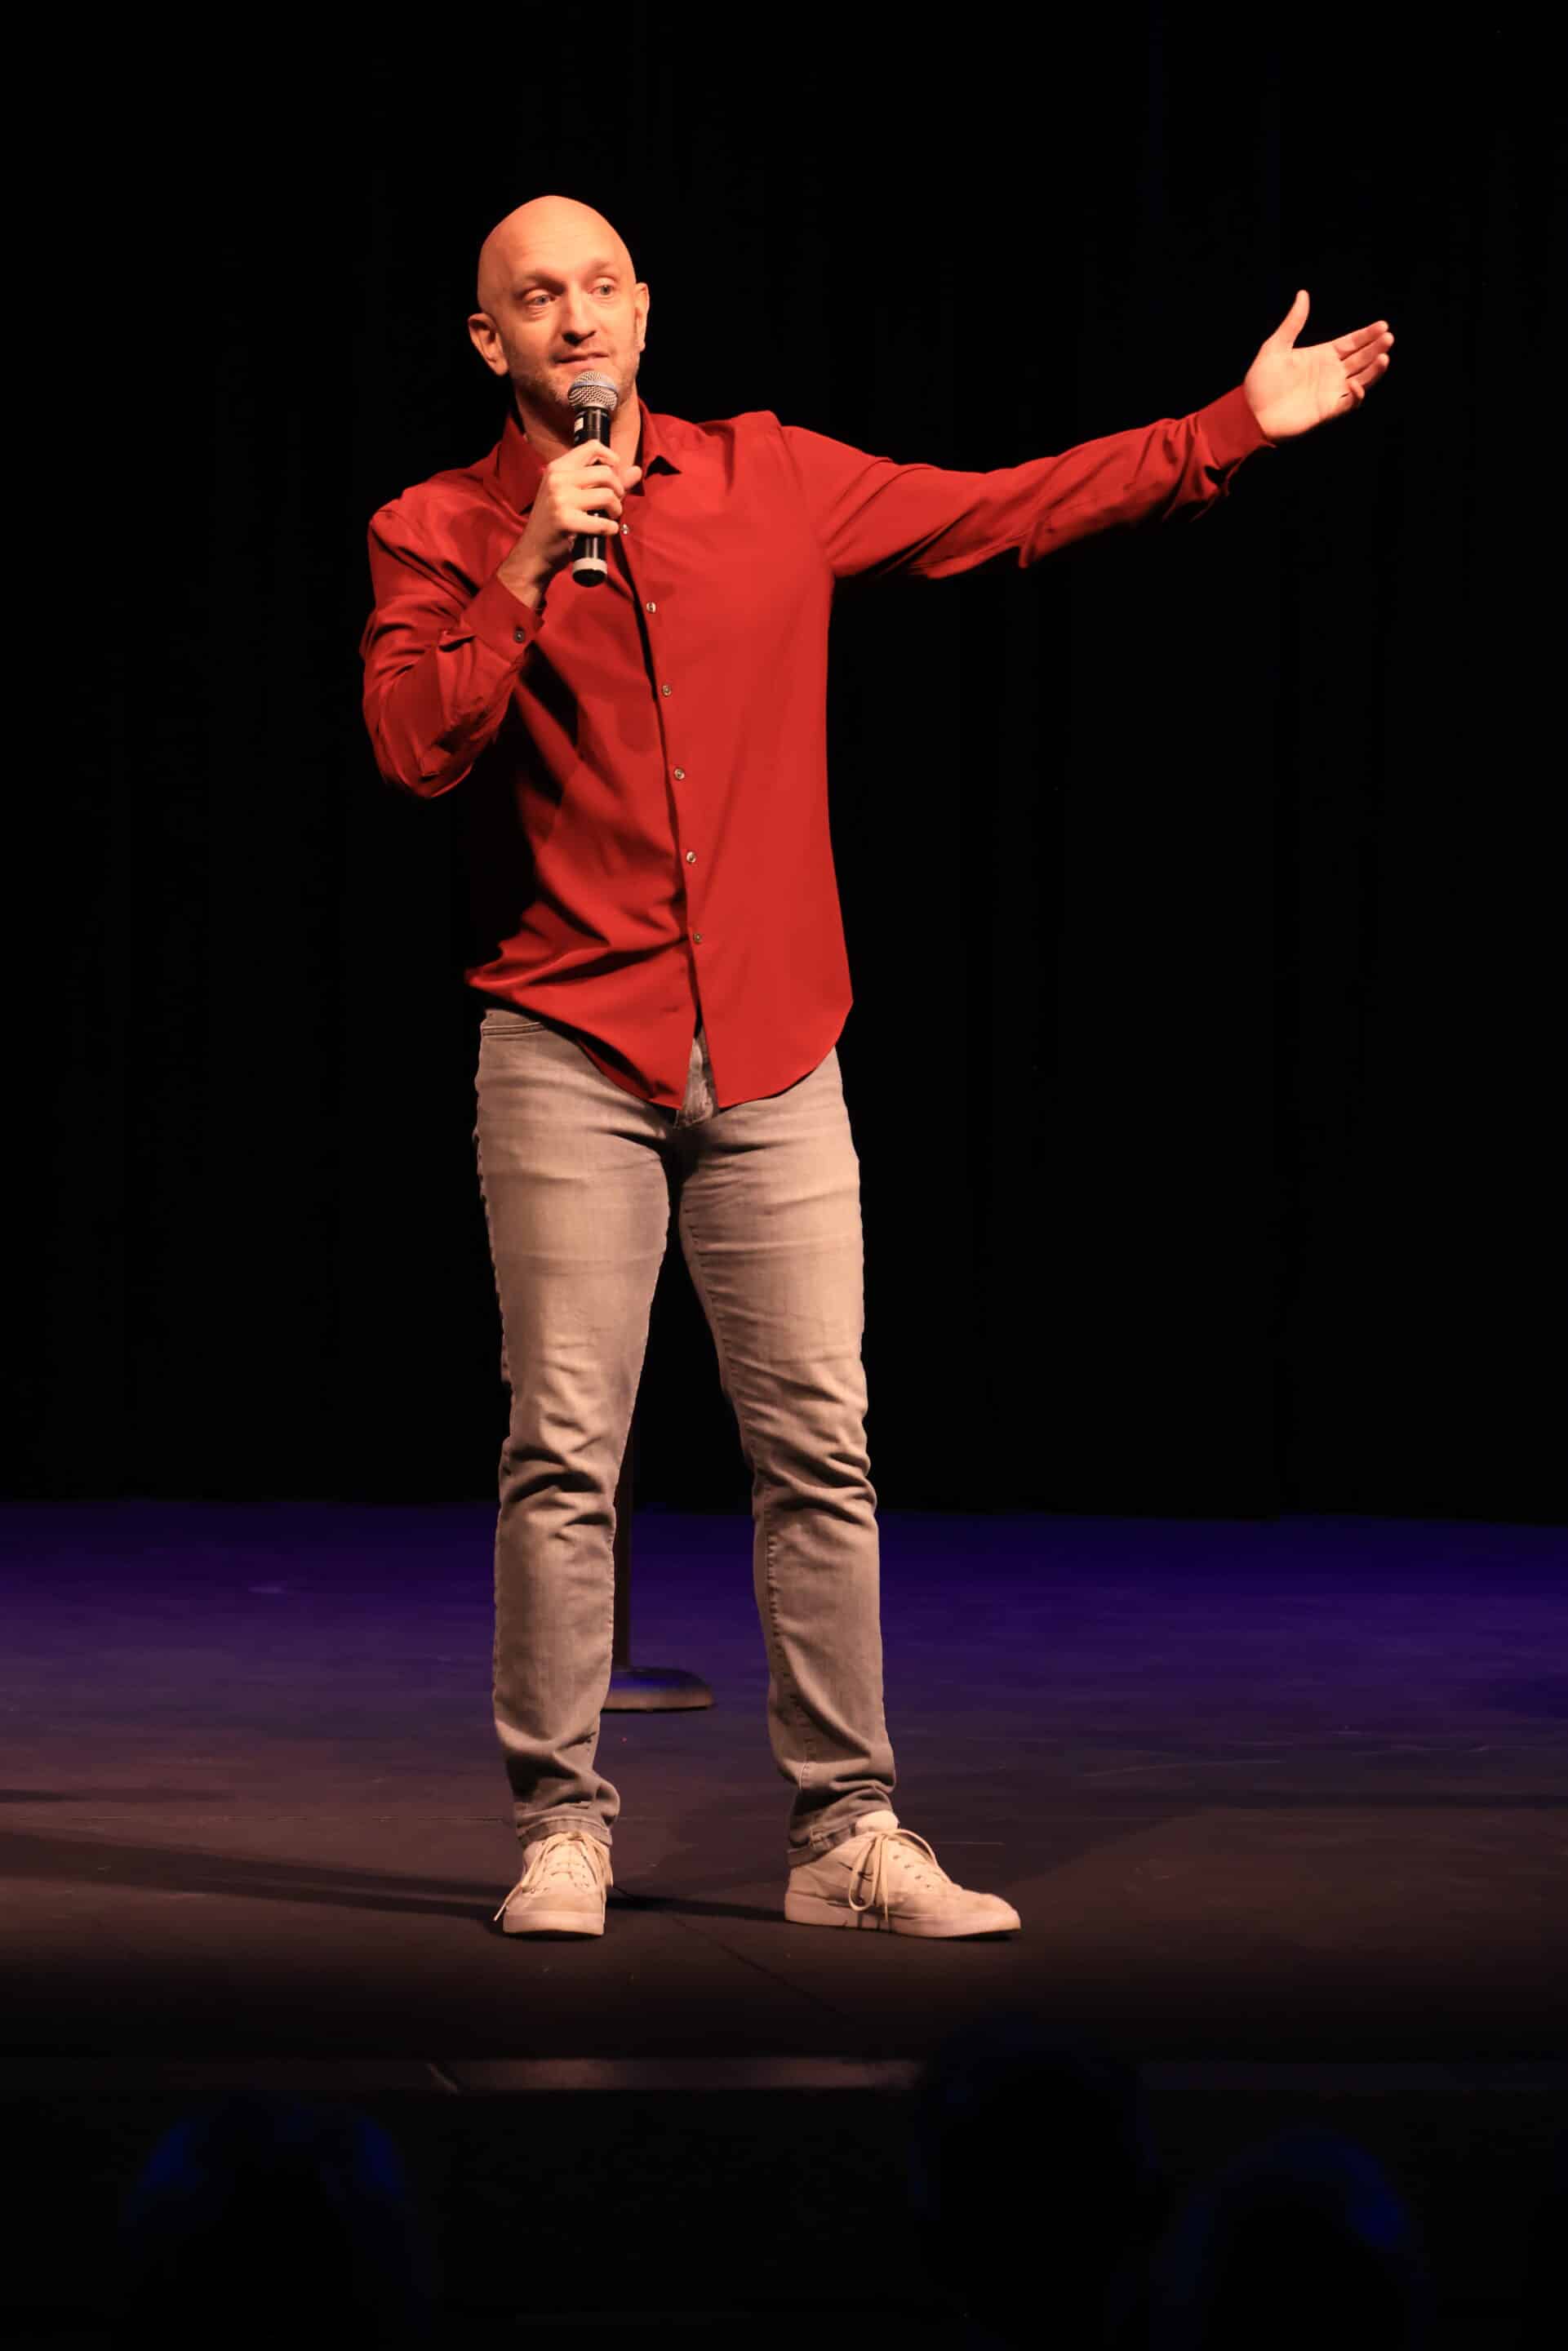 Paul Green Comedy performing Comedy